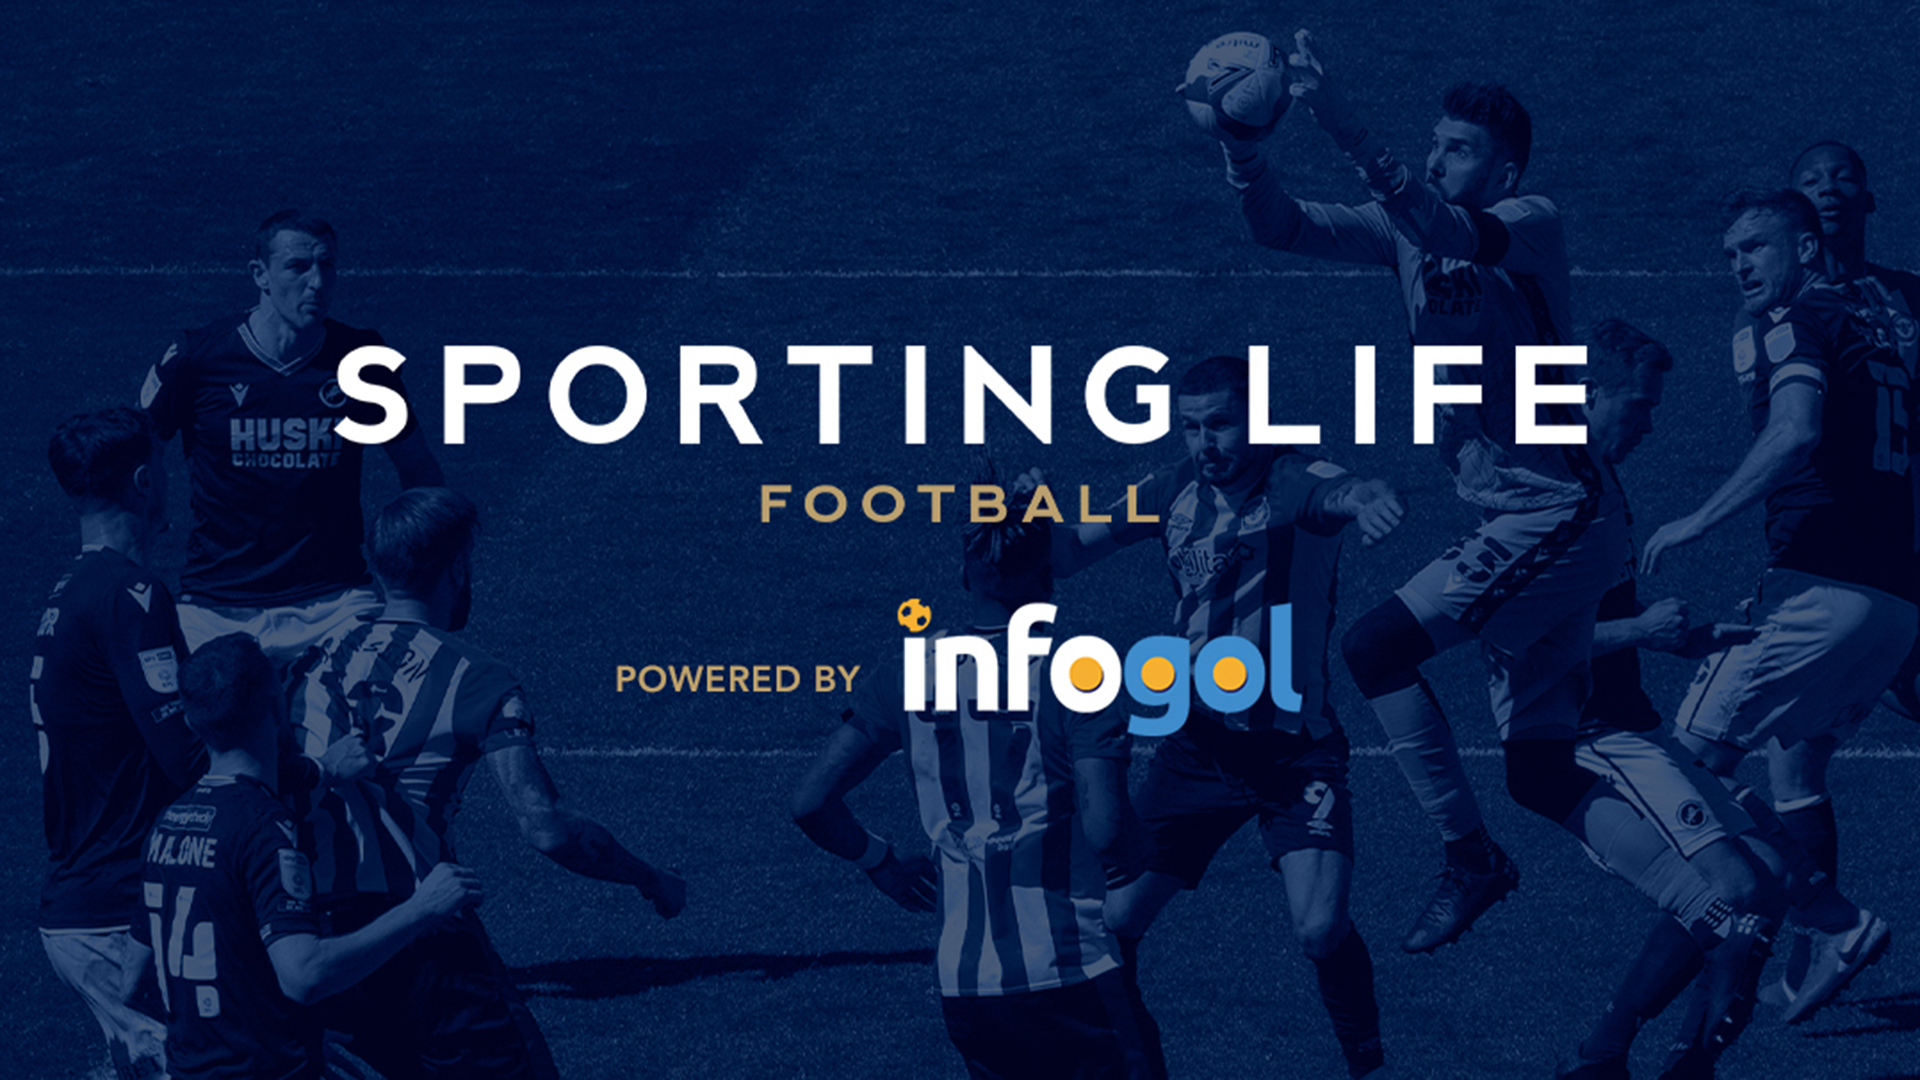 Sporting Life Football and Infogol on social media Follow us on Facebook and Twitter!